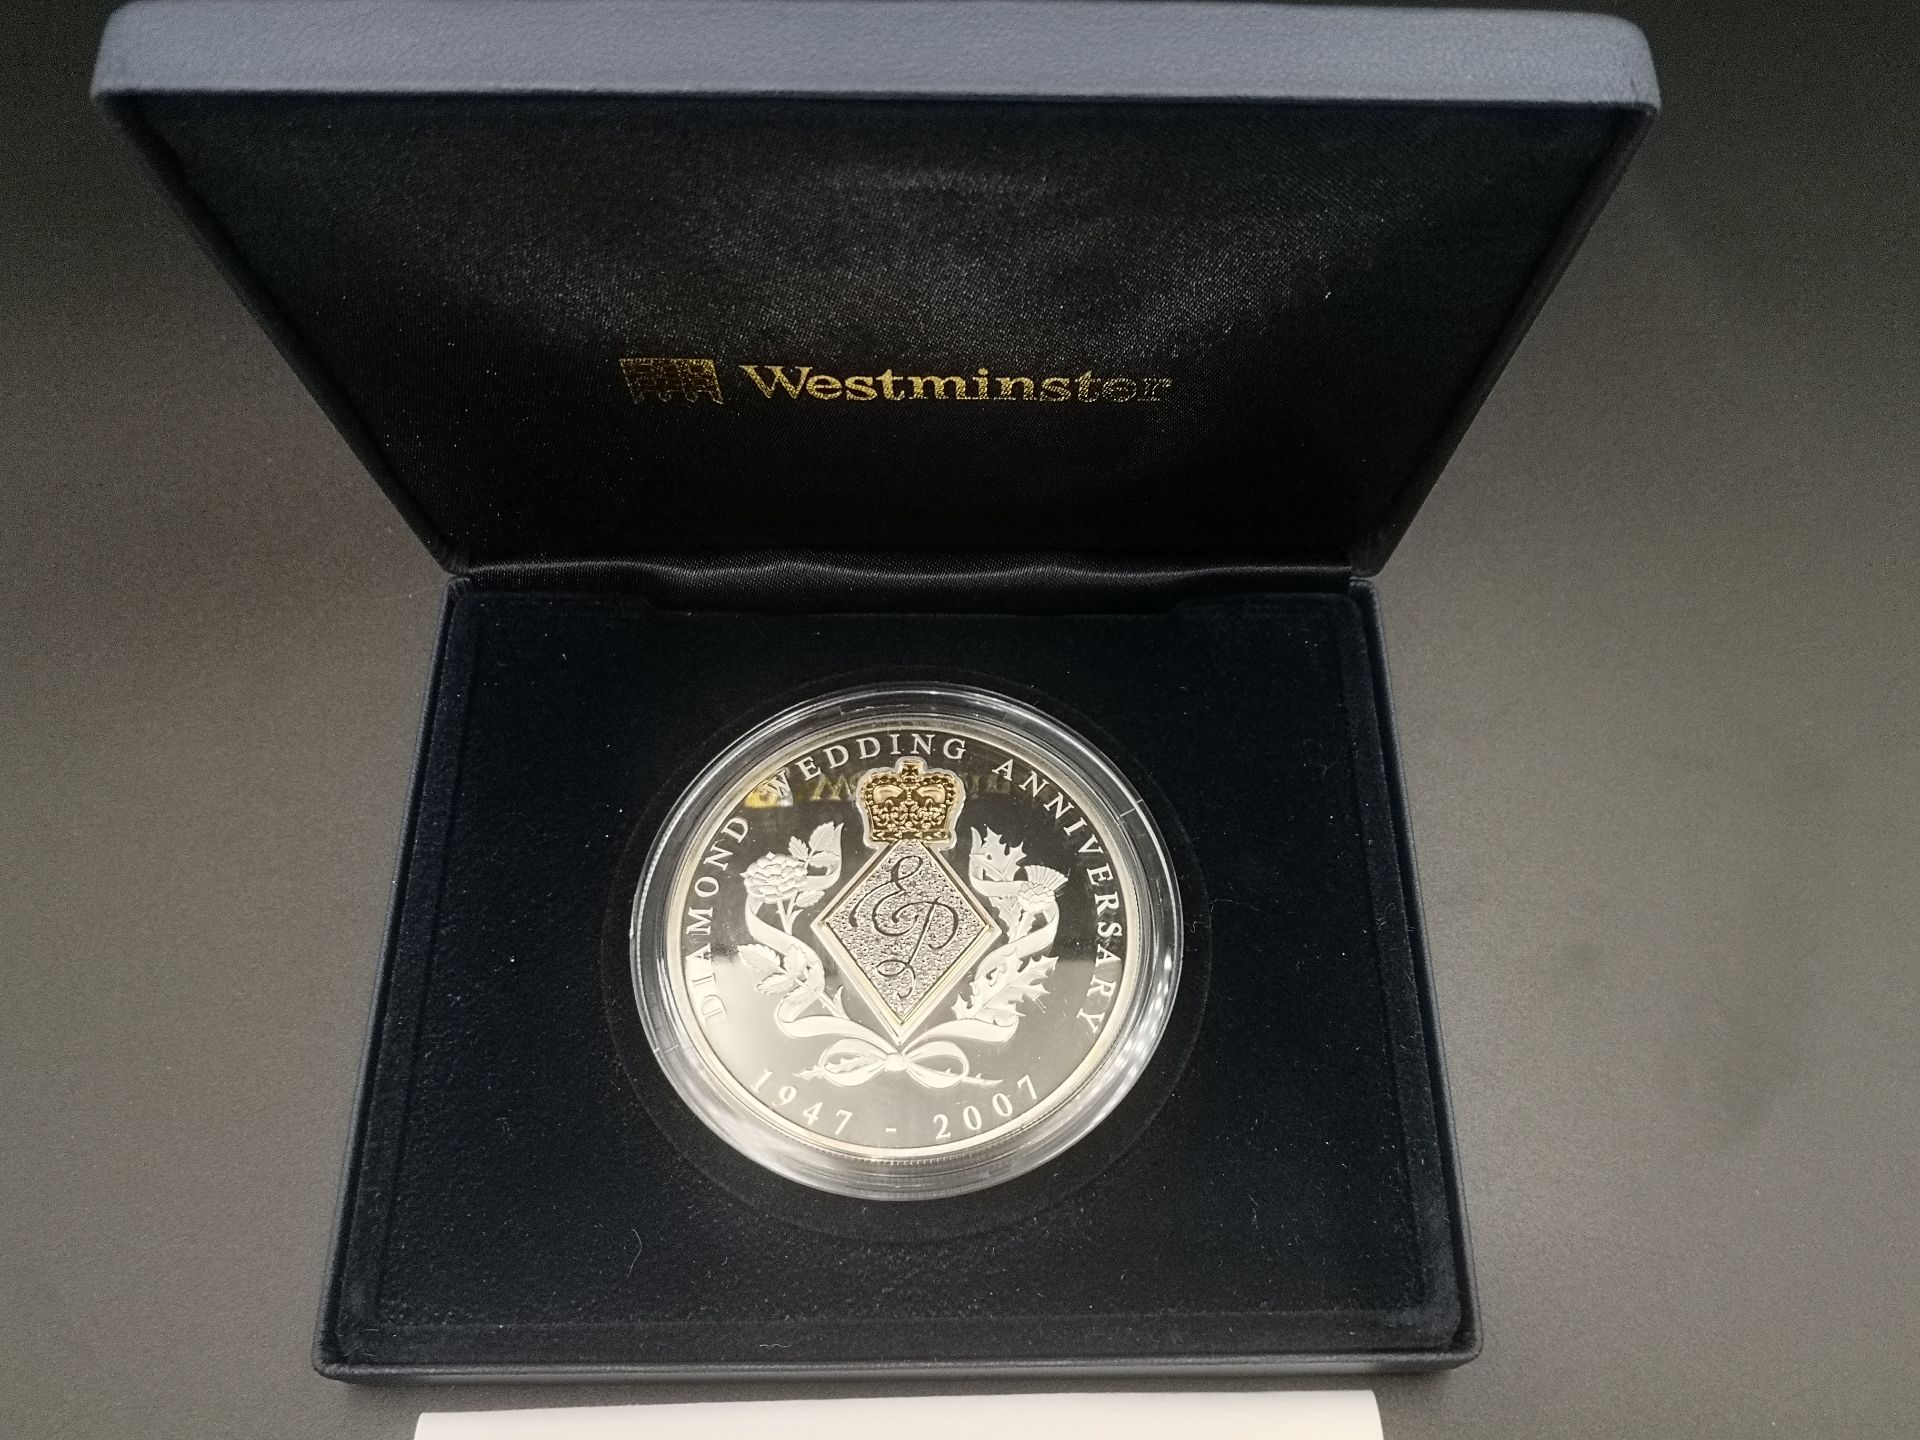 Westminster Diamond Wedding silver commemorative coin - Image 2 of 4